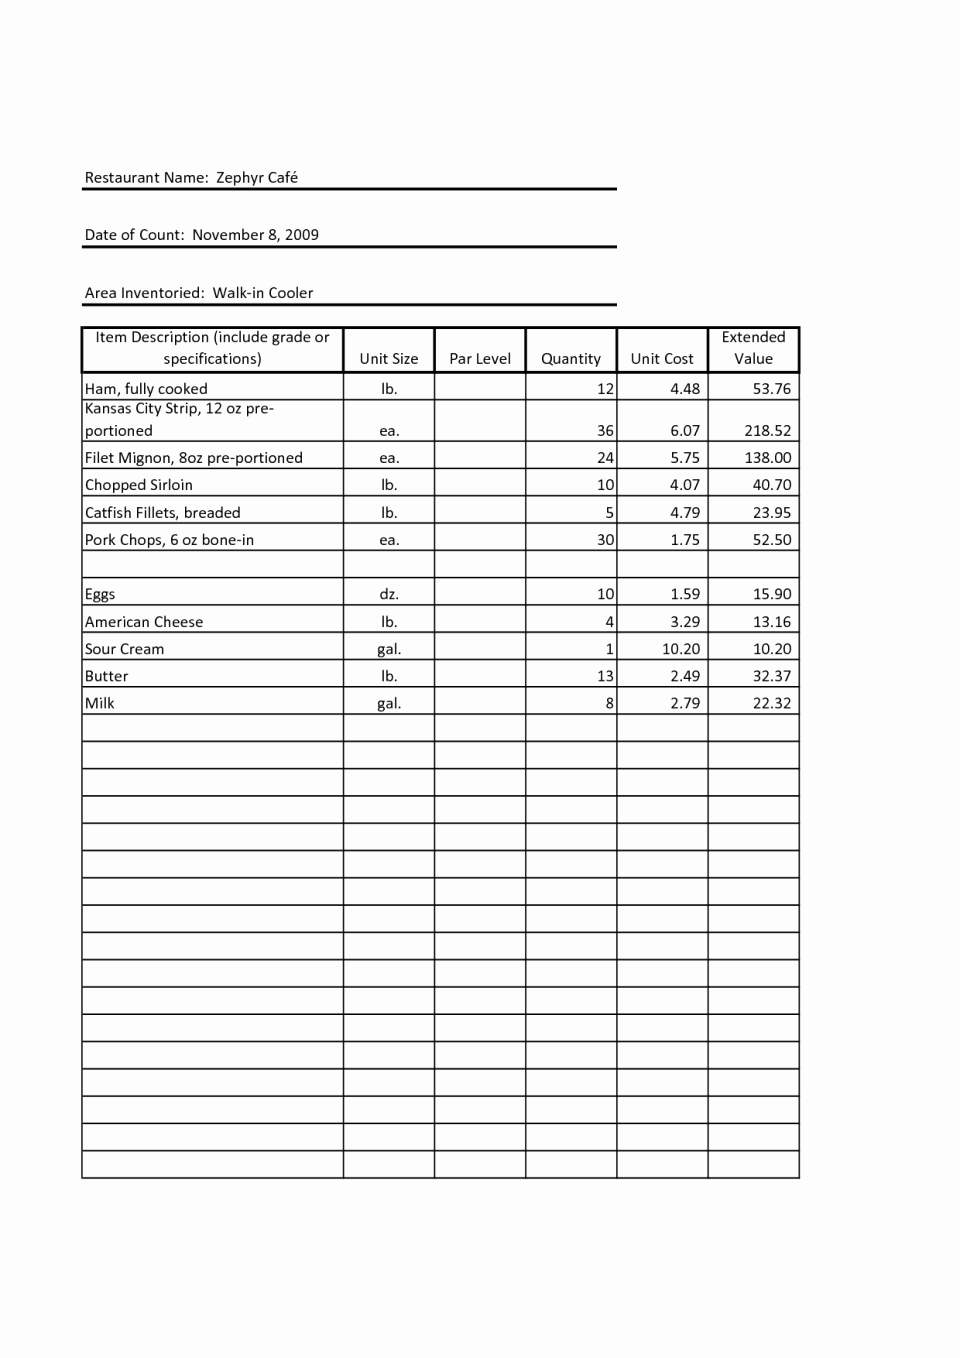 Inventory Count Sheet Template Free Inspirational Inventory form Sample Pdf Spreadsheet Count Sheet Template